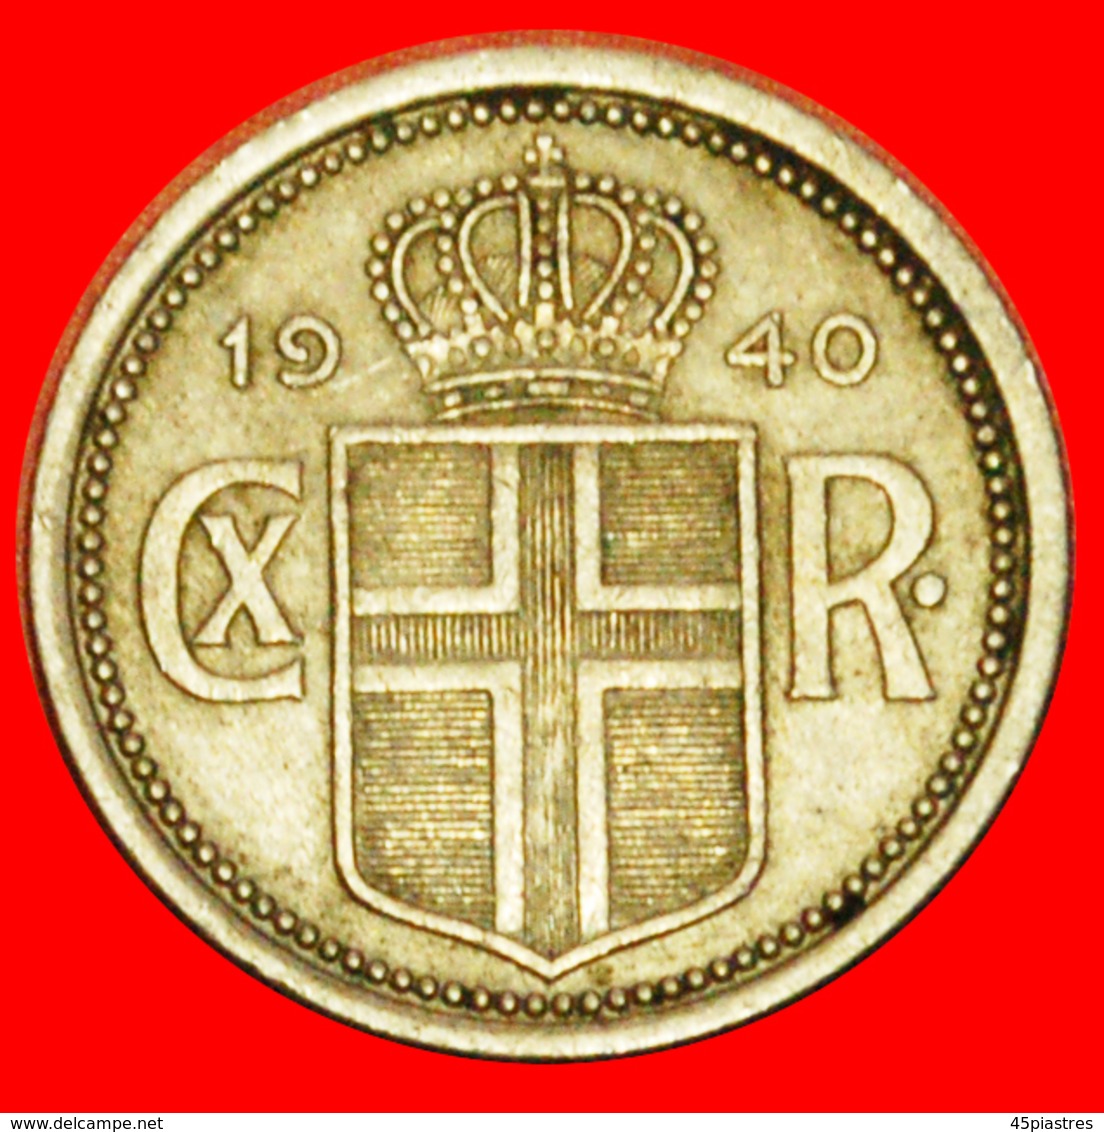 # GREAT BRITAIN: ICELAND ★ 25 ORE 1940 WARTIME (1939-1945)! LOW START ★ NO RESERVE! Christian X (1918-1944) - Islande